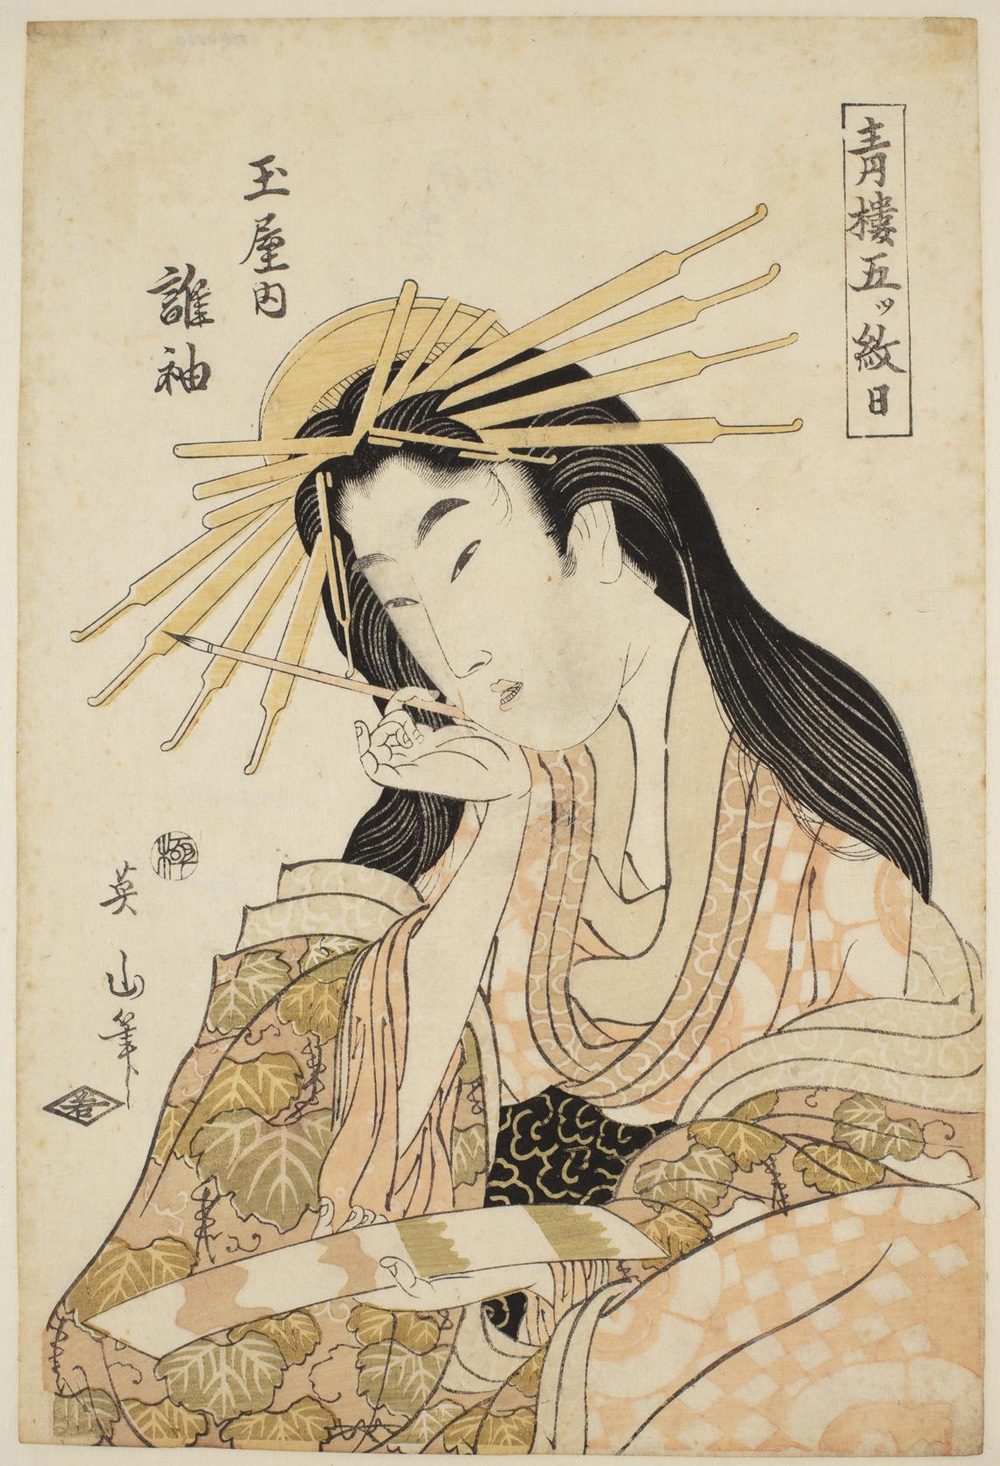 Japanese print of a woman dressed in traditional robes. She holds a brush in one hand up by her face and looks down at the piece of paper she holds in the other hand.